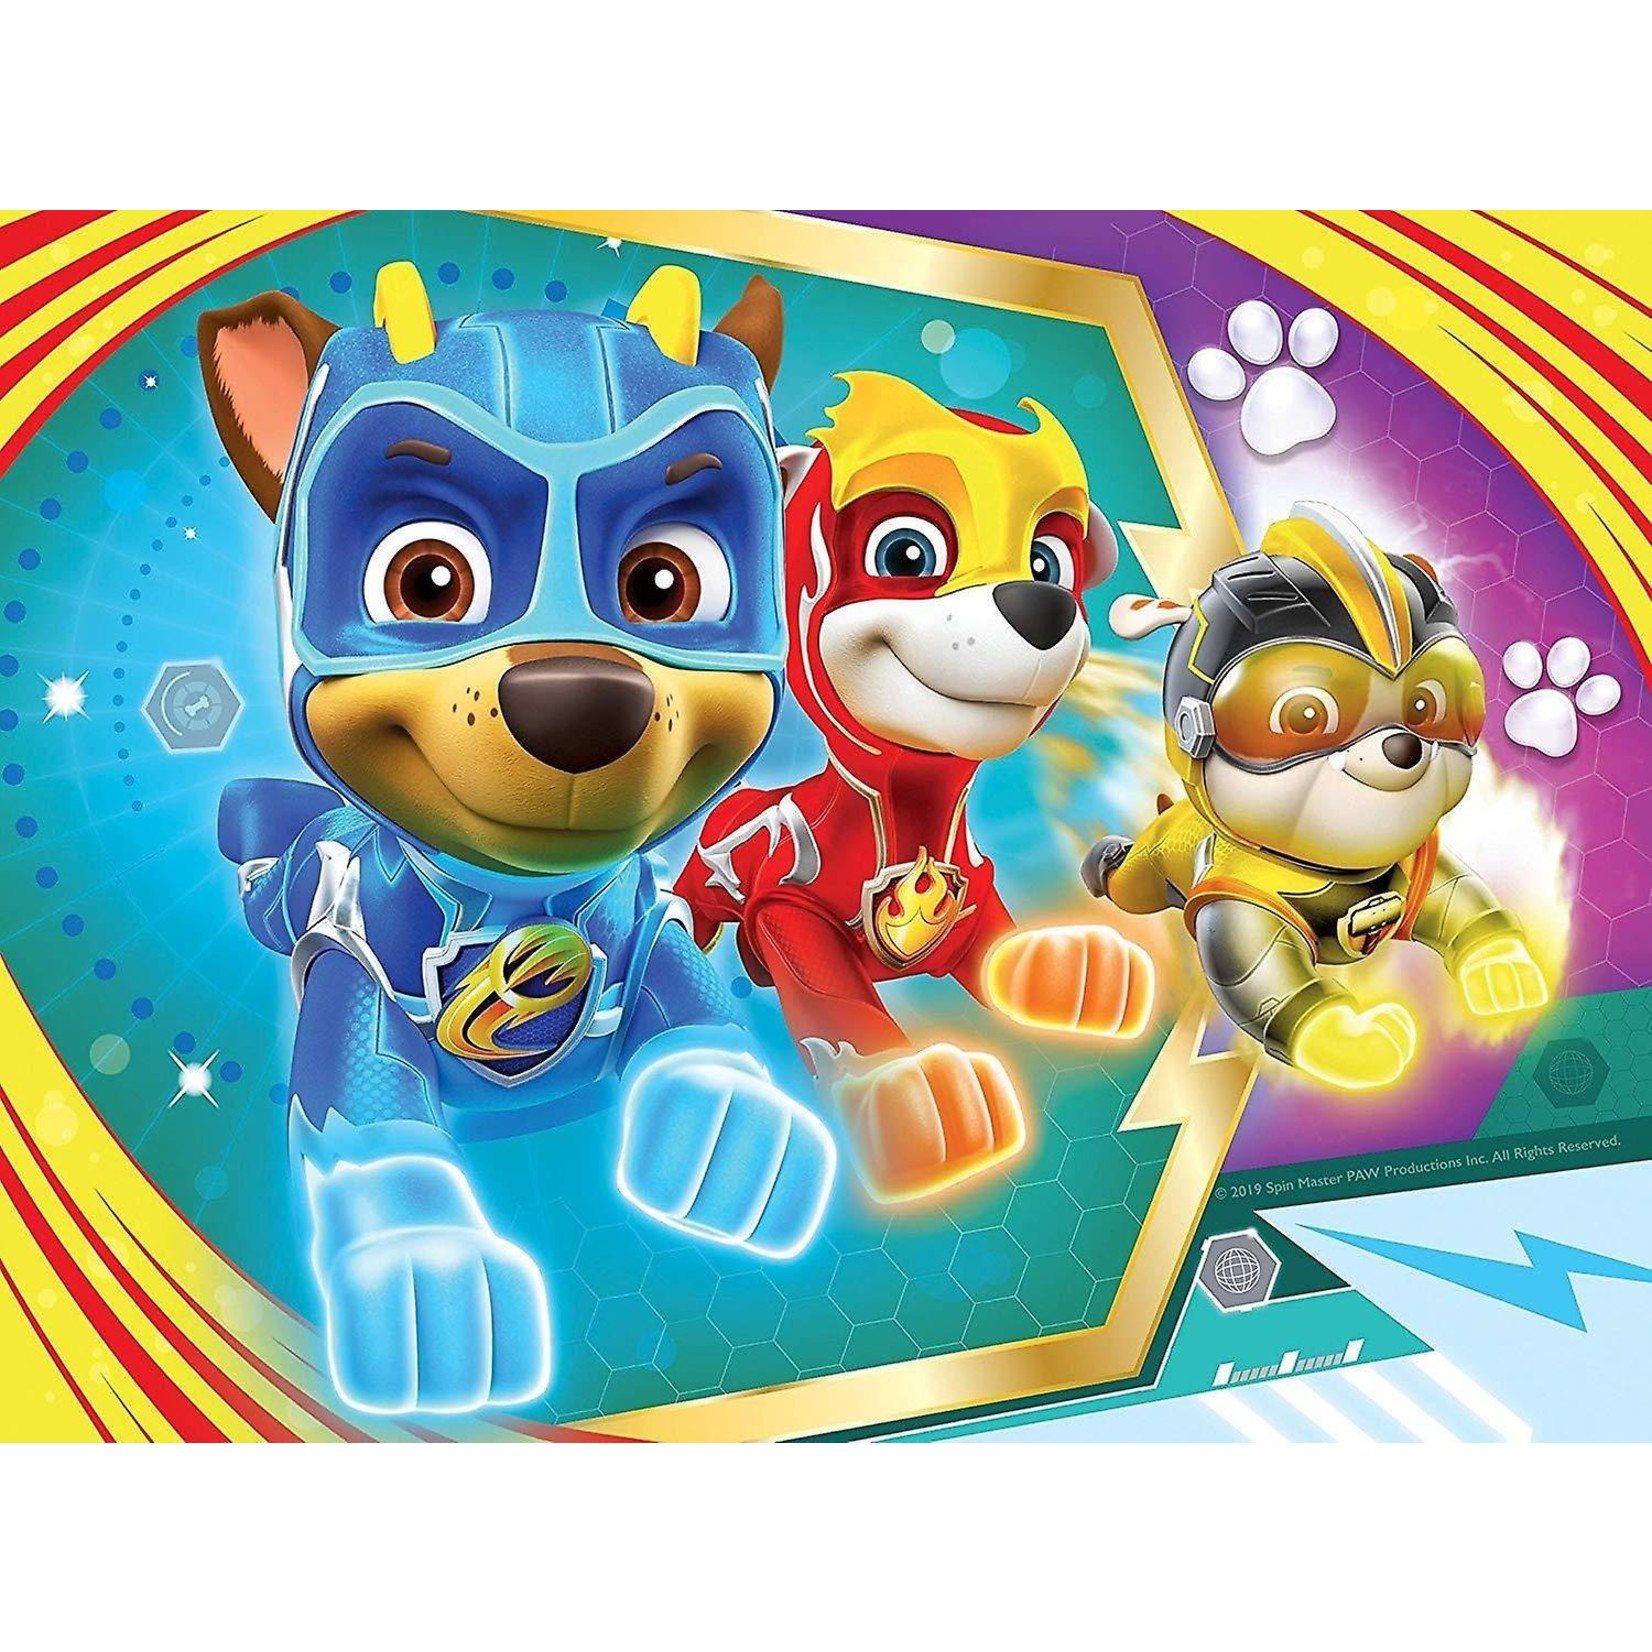 Ravensburger PAW Patrol 4 in 1 Mighty Pups Puzzle Ravensburger